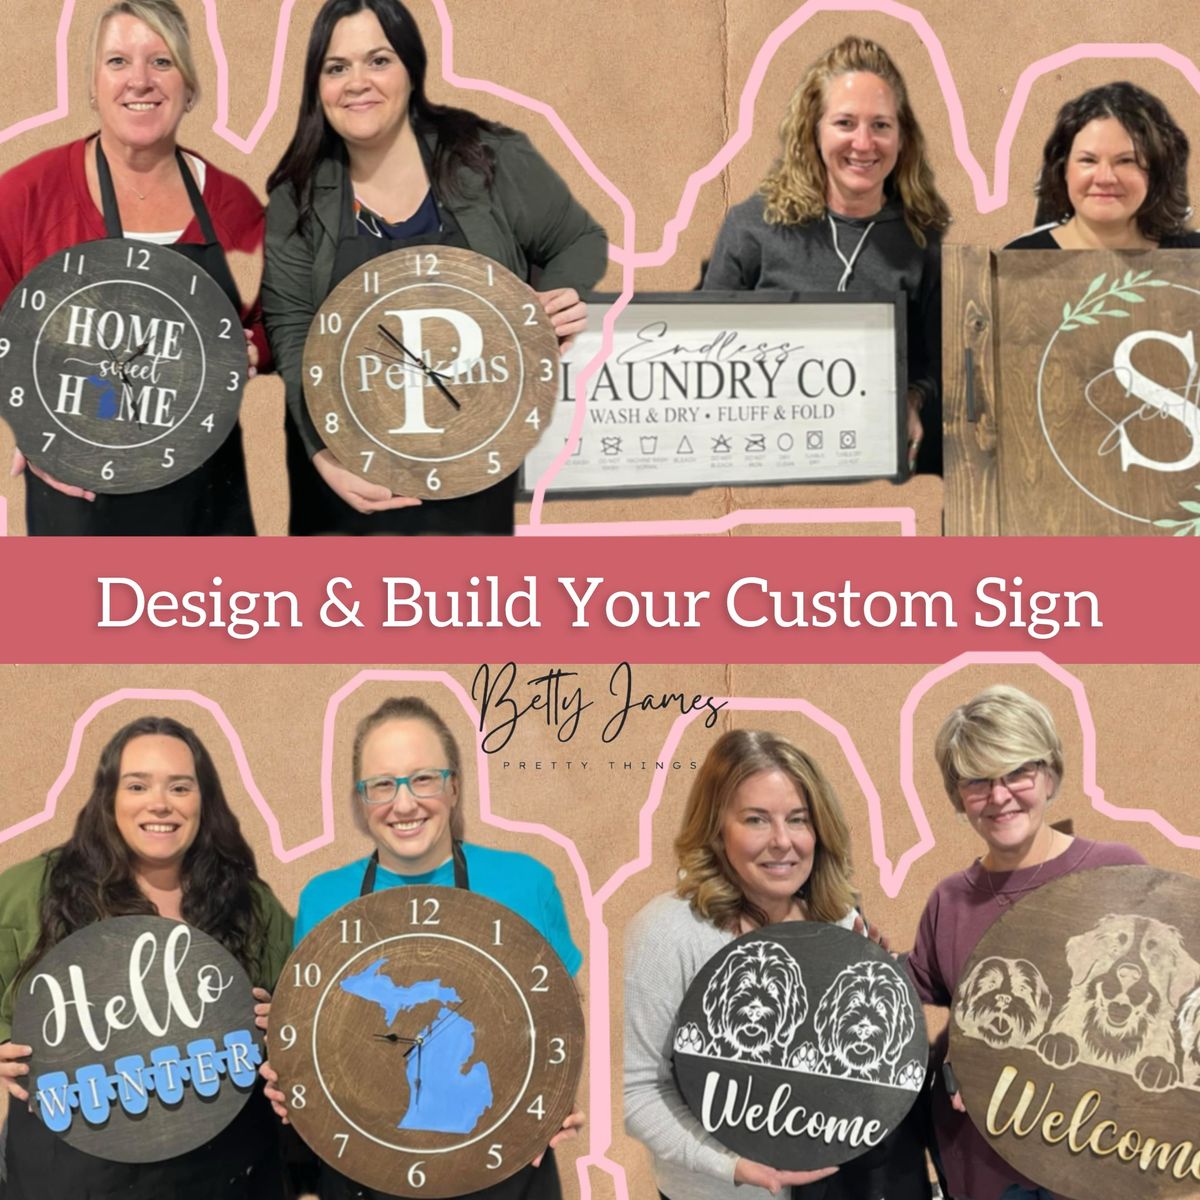 DIY: Build & Design Your Sign - Painting Event